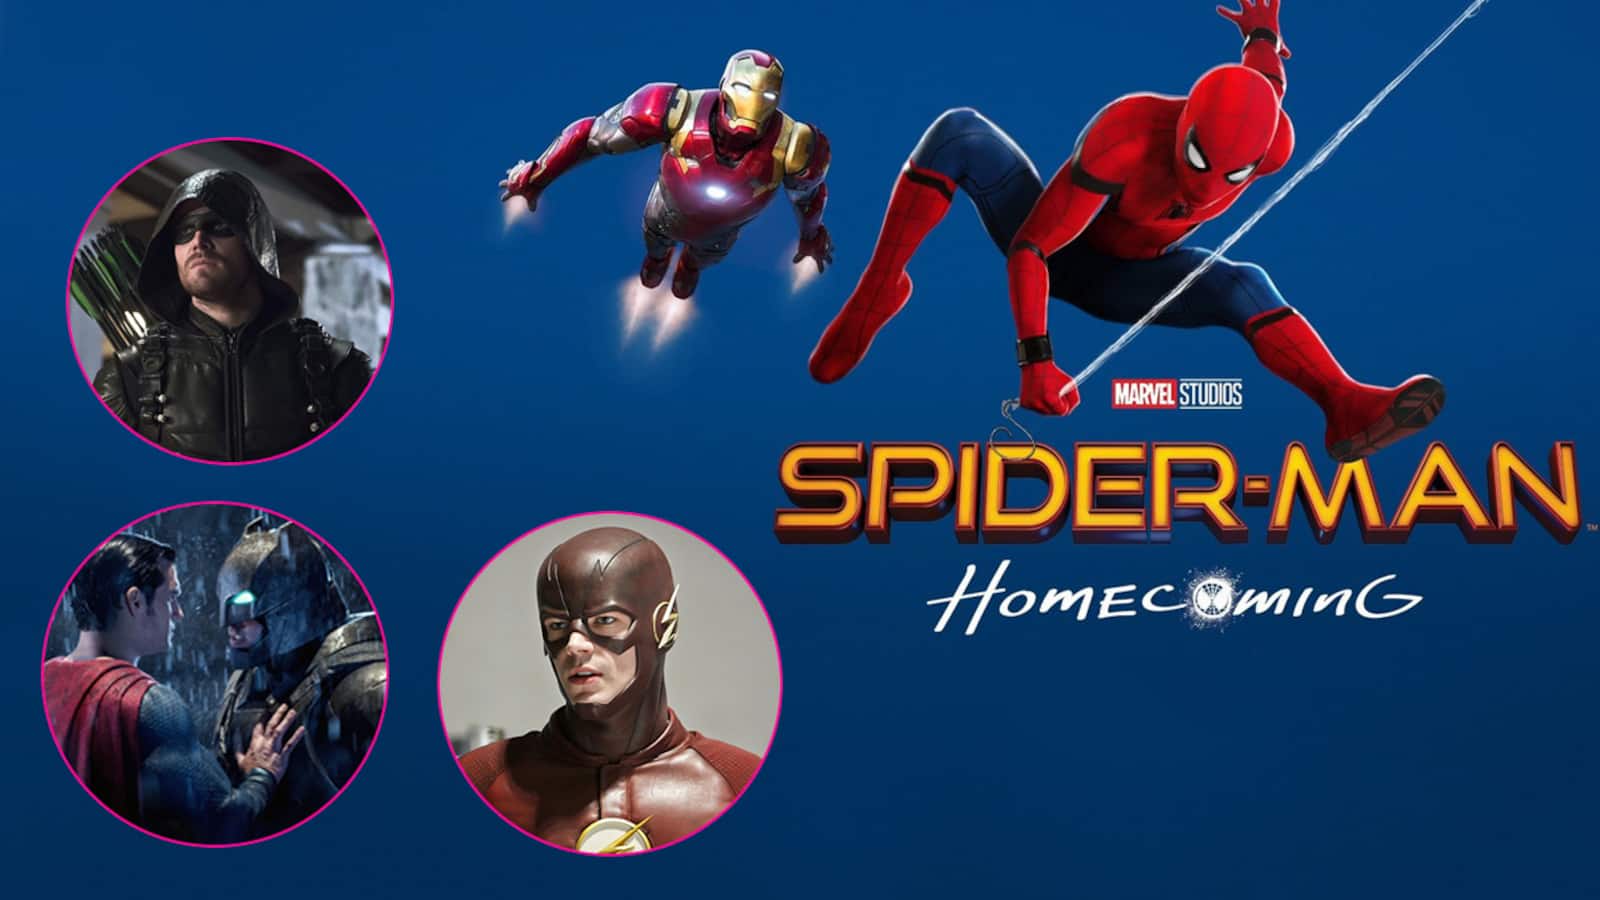 Batman, Superman, The Flash - 5 moments in Tom Holland's Spider-Man:  Homecoming that reminded us of other superheroes - Bollywood News & Gossip,  Movie Reviews, Trailers & Videos at 